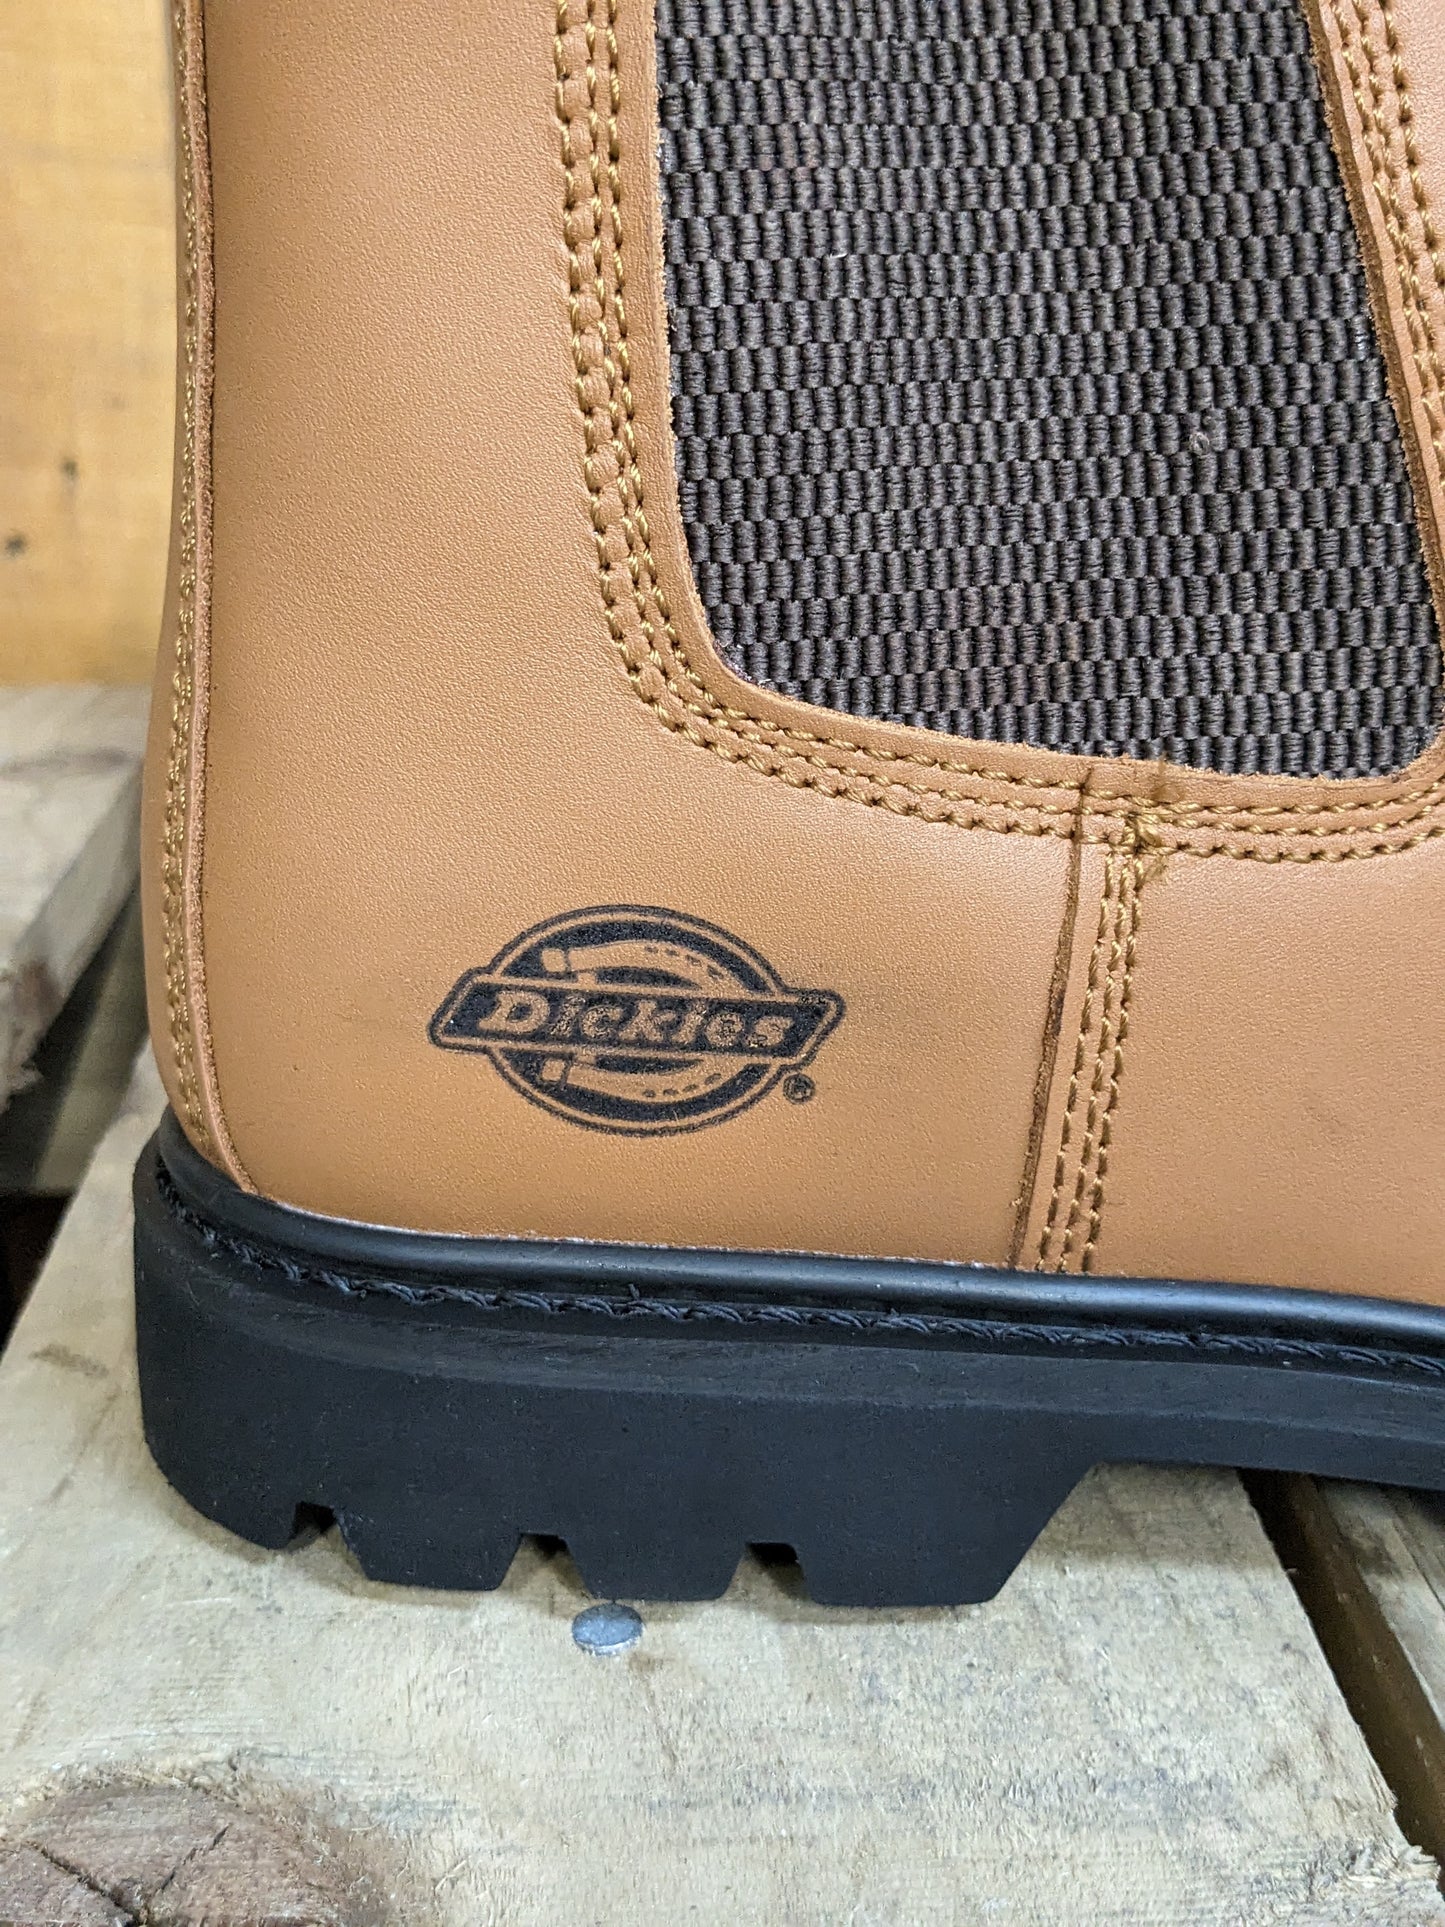 Dickies Fife II Safety Boot - Chestnut